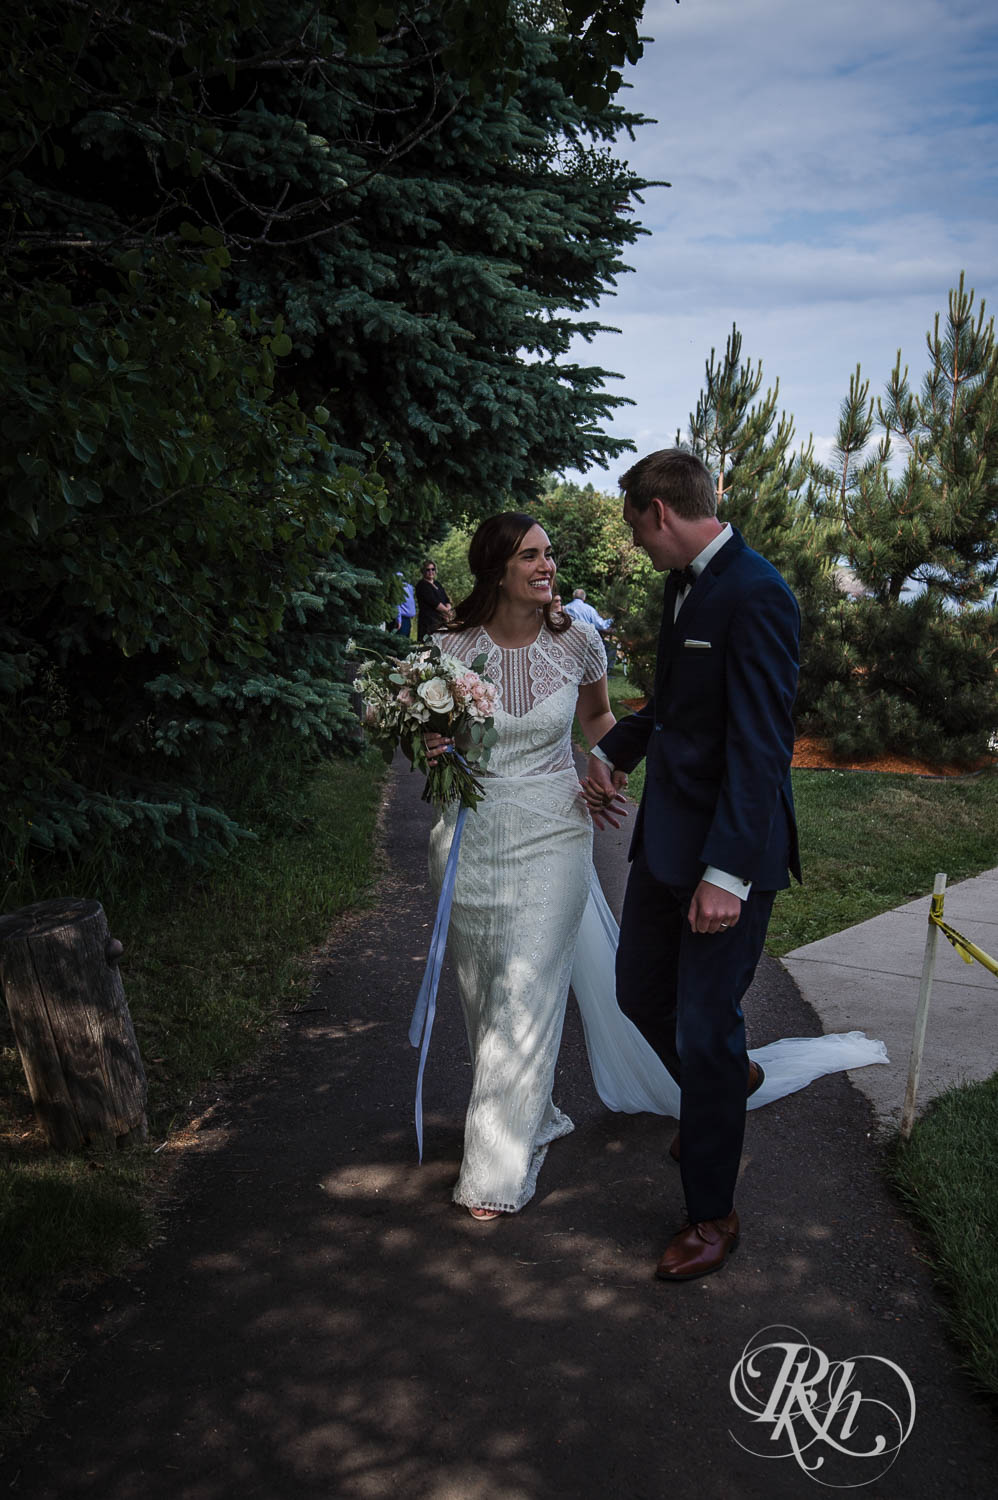 Bride and groom smile after ceremony at their Bluefin Bay wedding in Tofte, Minnesota.